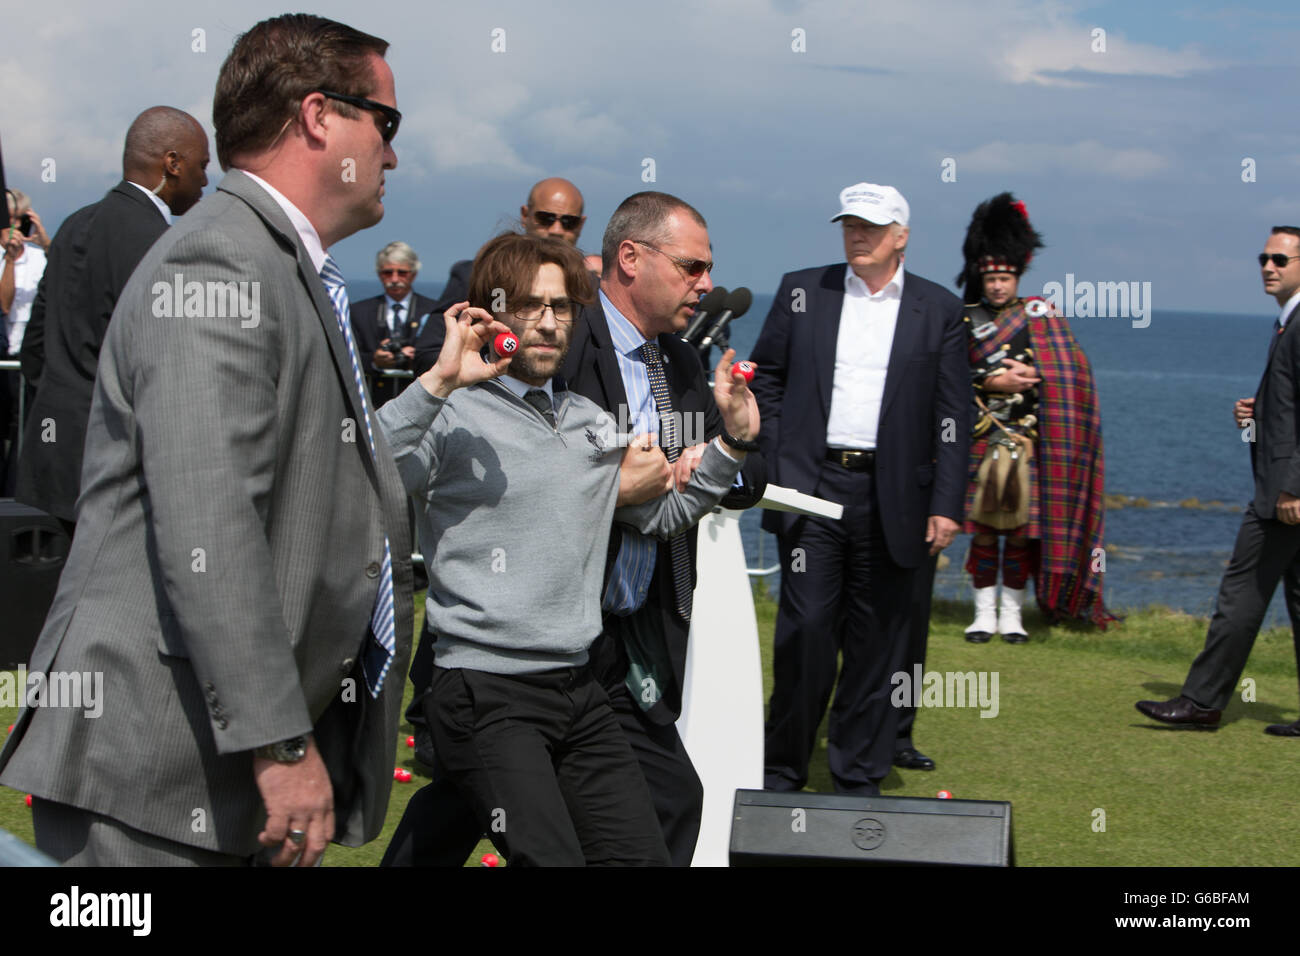 Republic presidential nominee Donald Trump holds a press conference on the 9th hole tee, with his family members Don, Eric and Ivanka, at his Trump Turnberry Golf Course, in Turnberry, Scotland, on 24 June 2016. Stock Photo